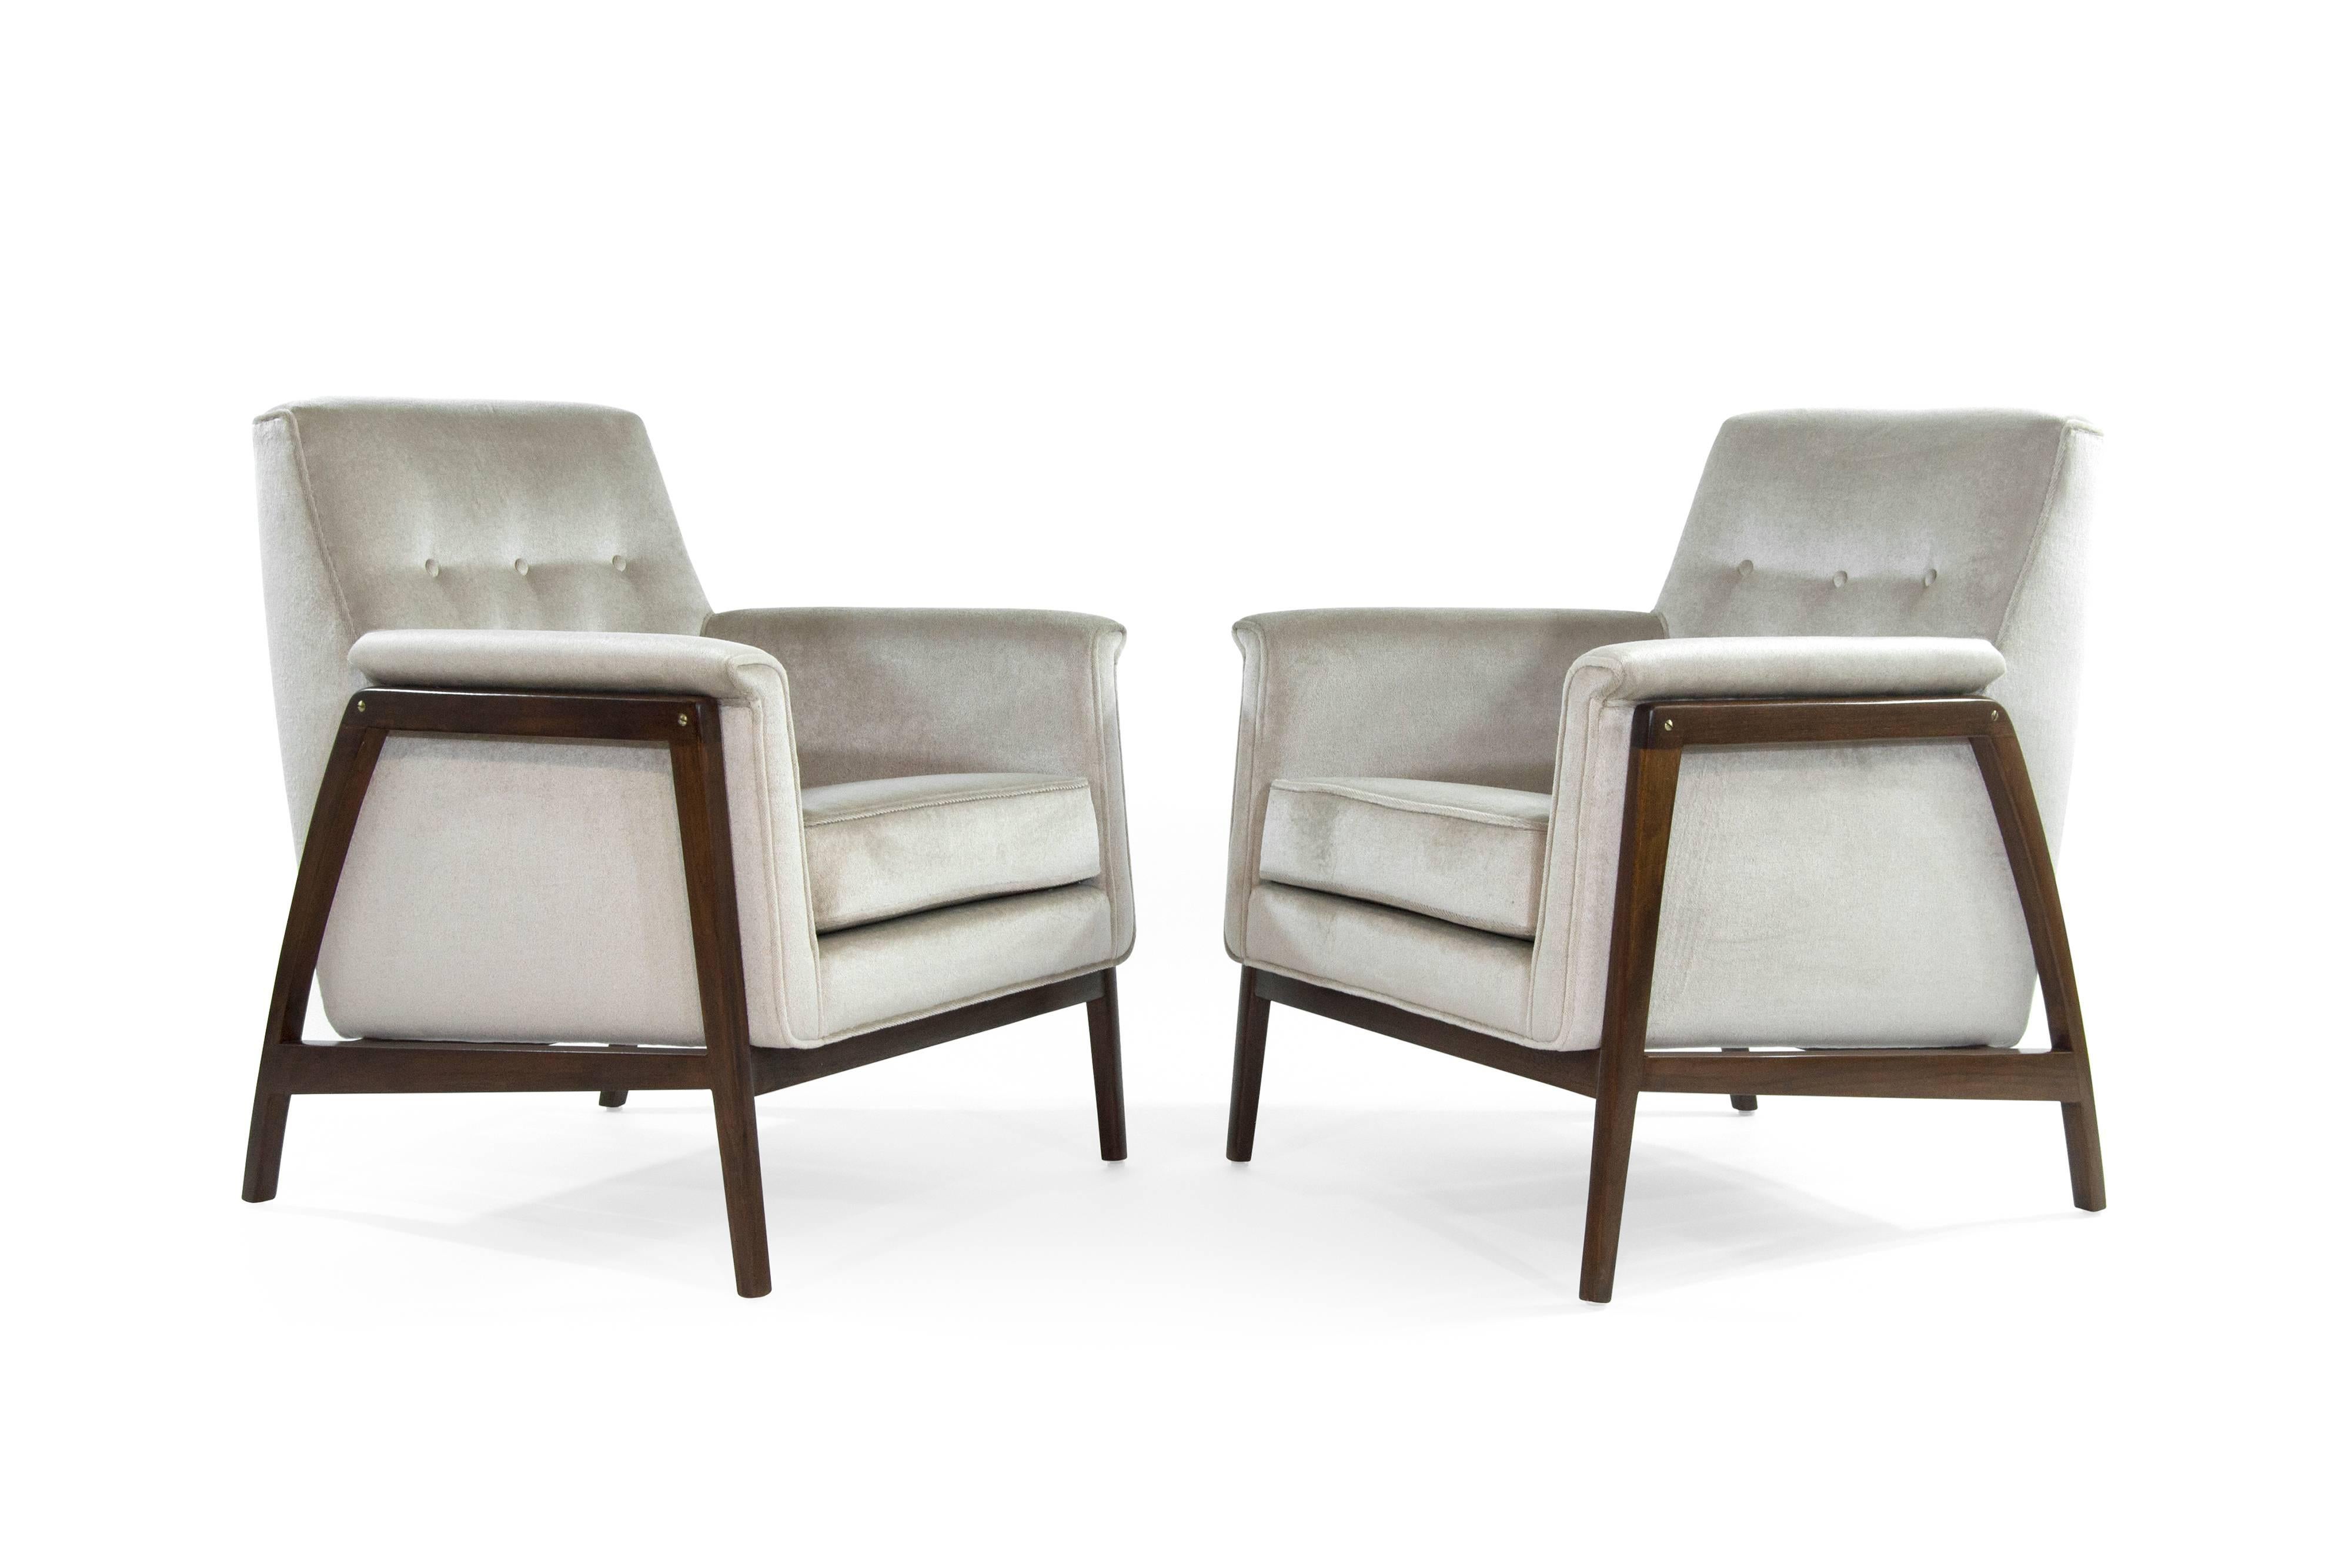 Set of rare armchairs designed by Edward Wormley for Dunbar, circa 1950s. Newly upholstered in grey plush velvet. Walnut frames fully restored.